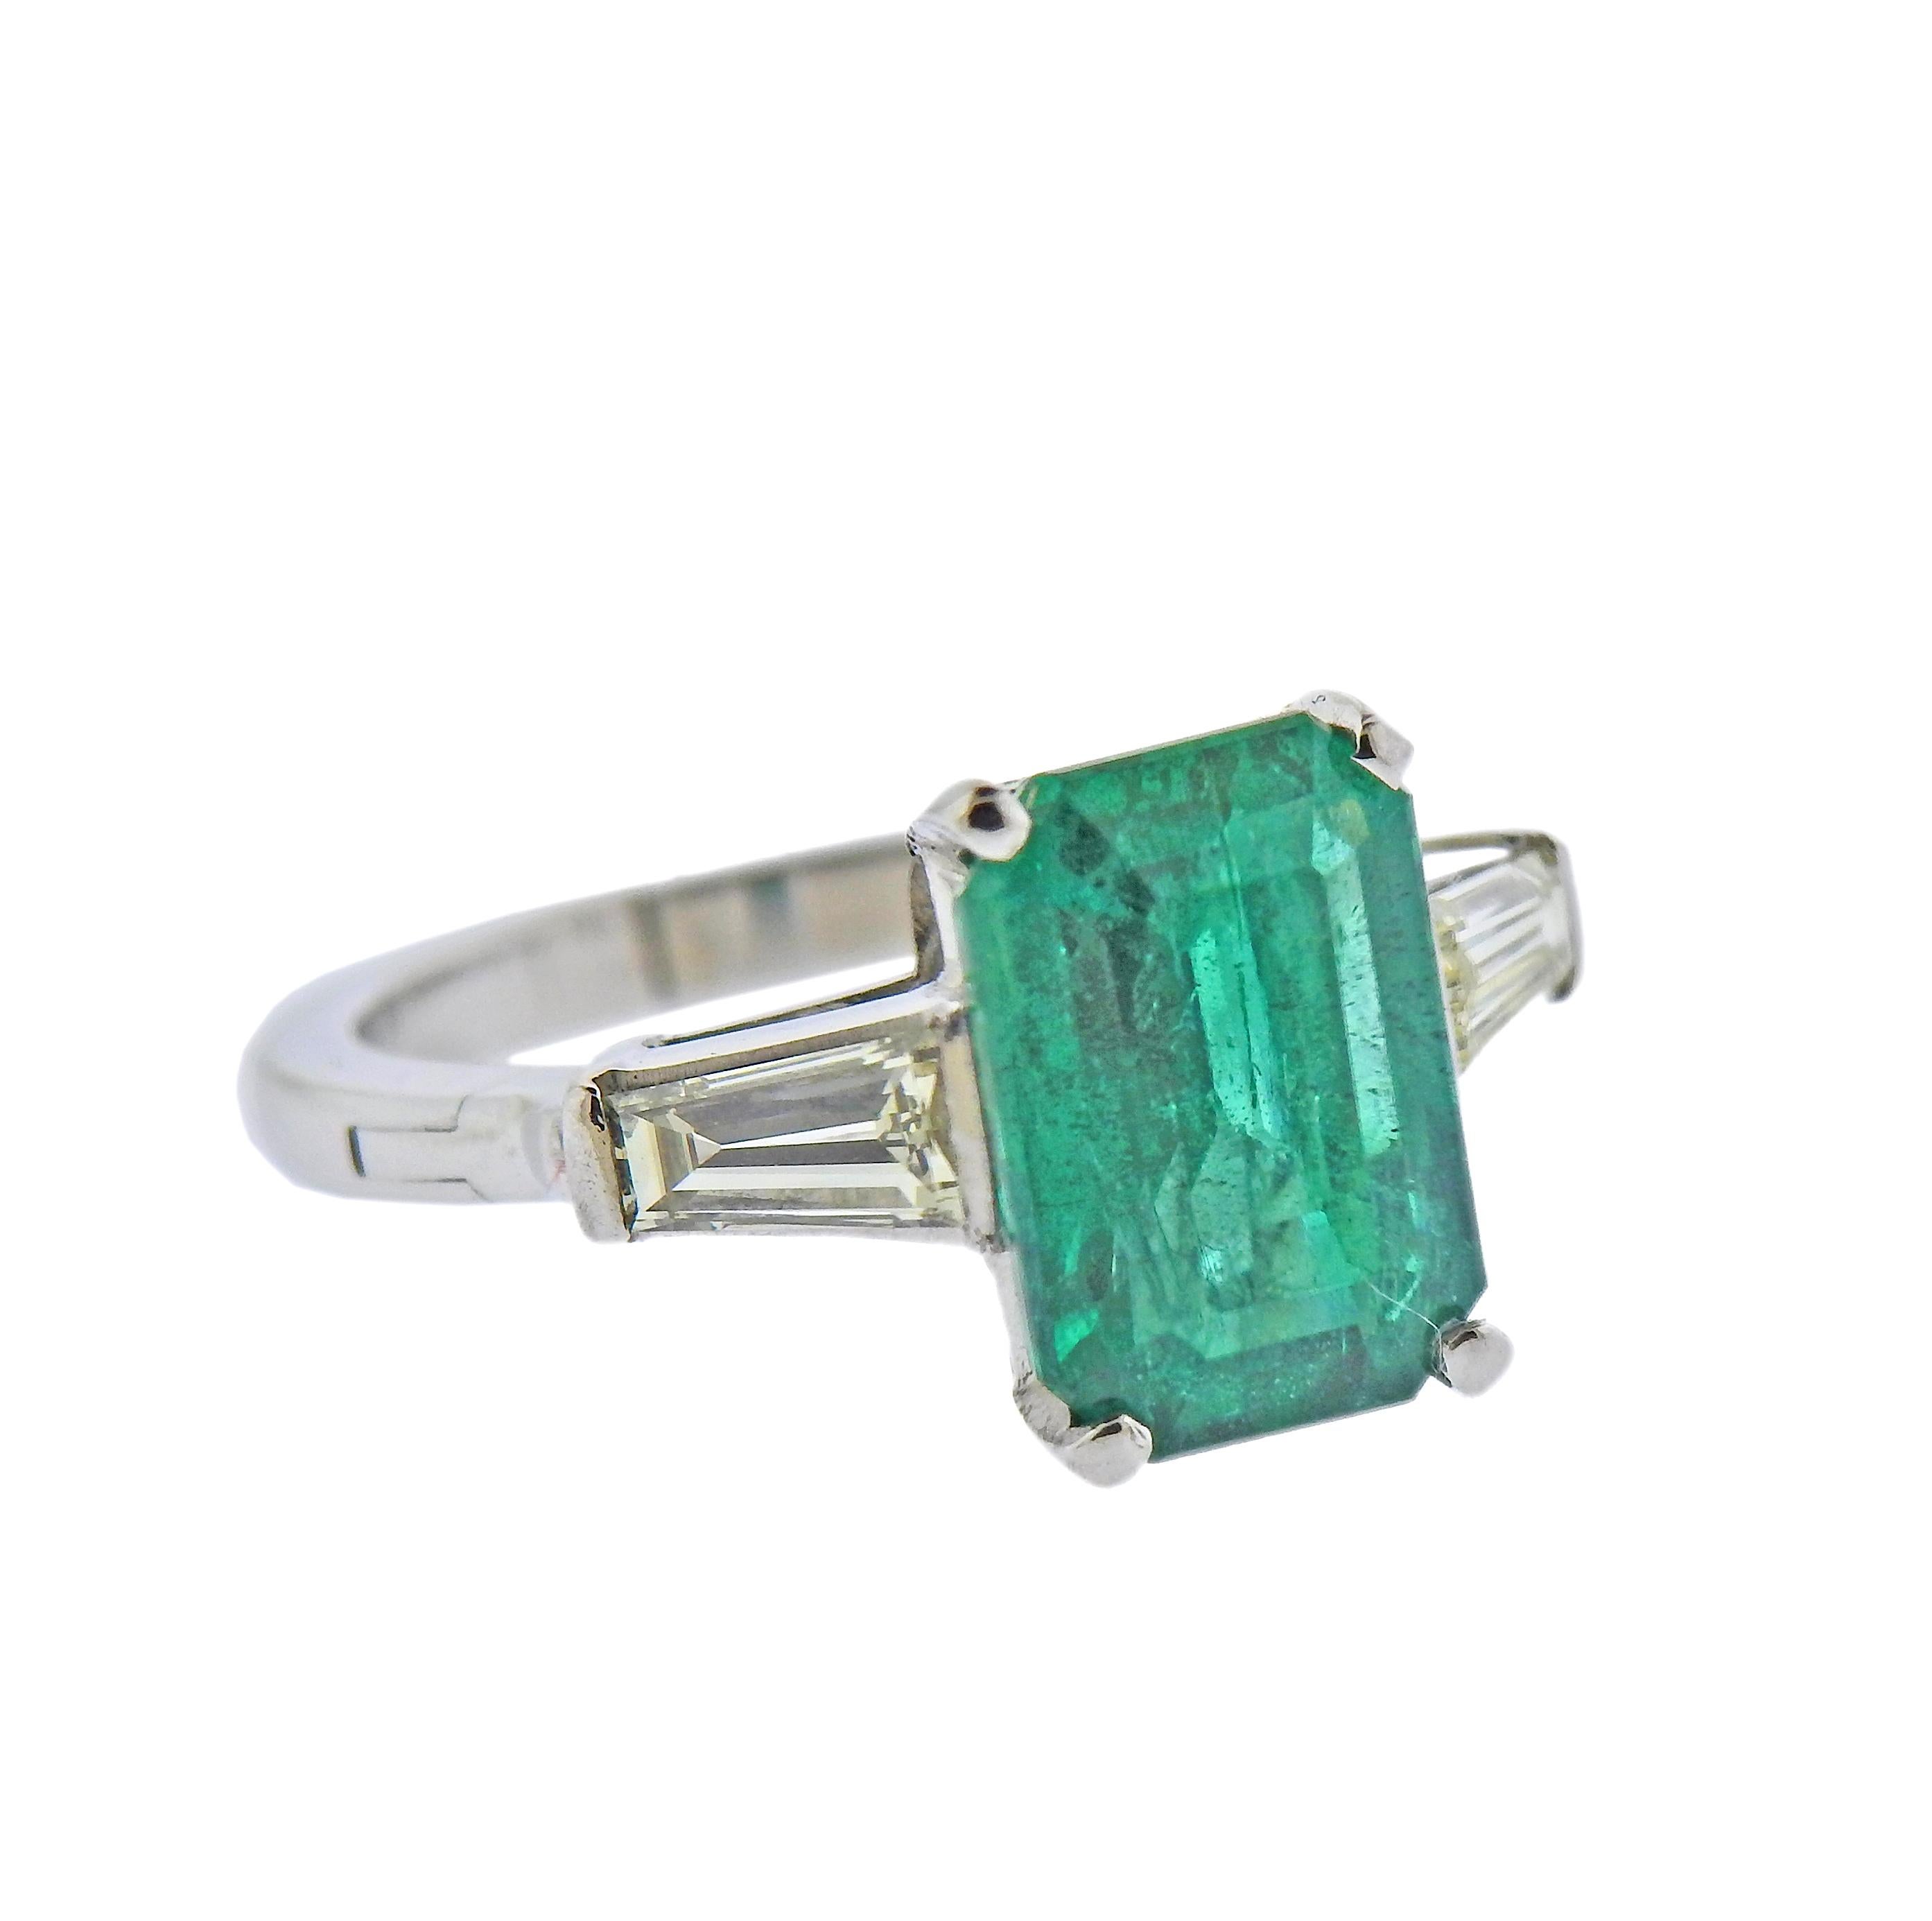 Platinum ring, featuring approx. 3.50ct emerald (measures 11.5 x 8.14 x 5.4mm), set with two tapered baguette diamonds on sides. Arthritis shank, ring size 5.75. Marked Plat (partially polished off). Weight - 6.5 grams.